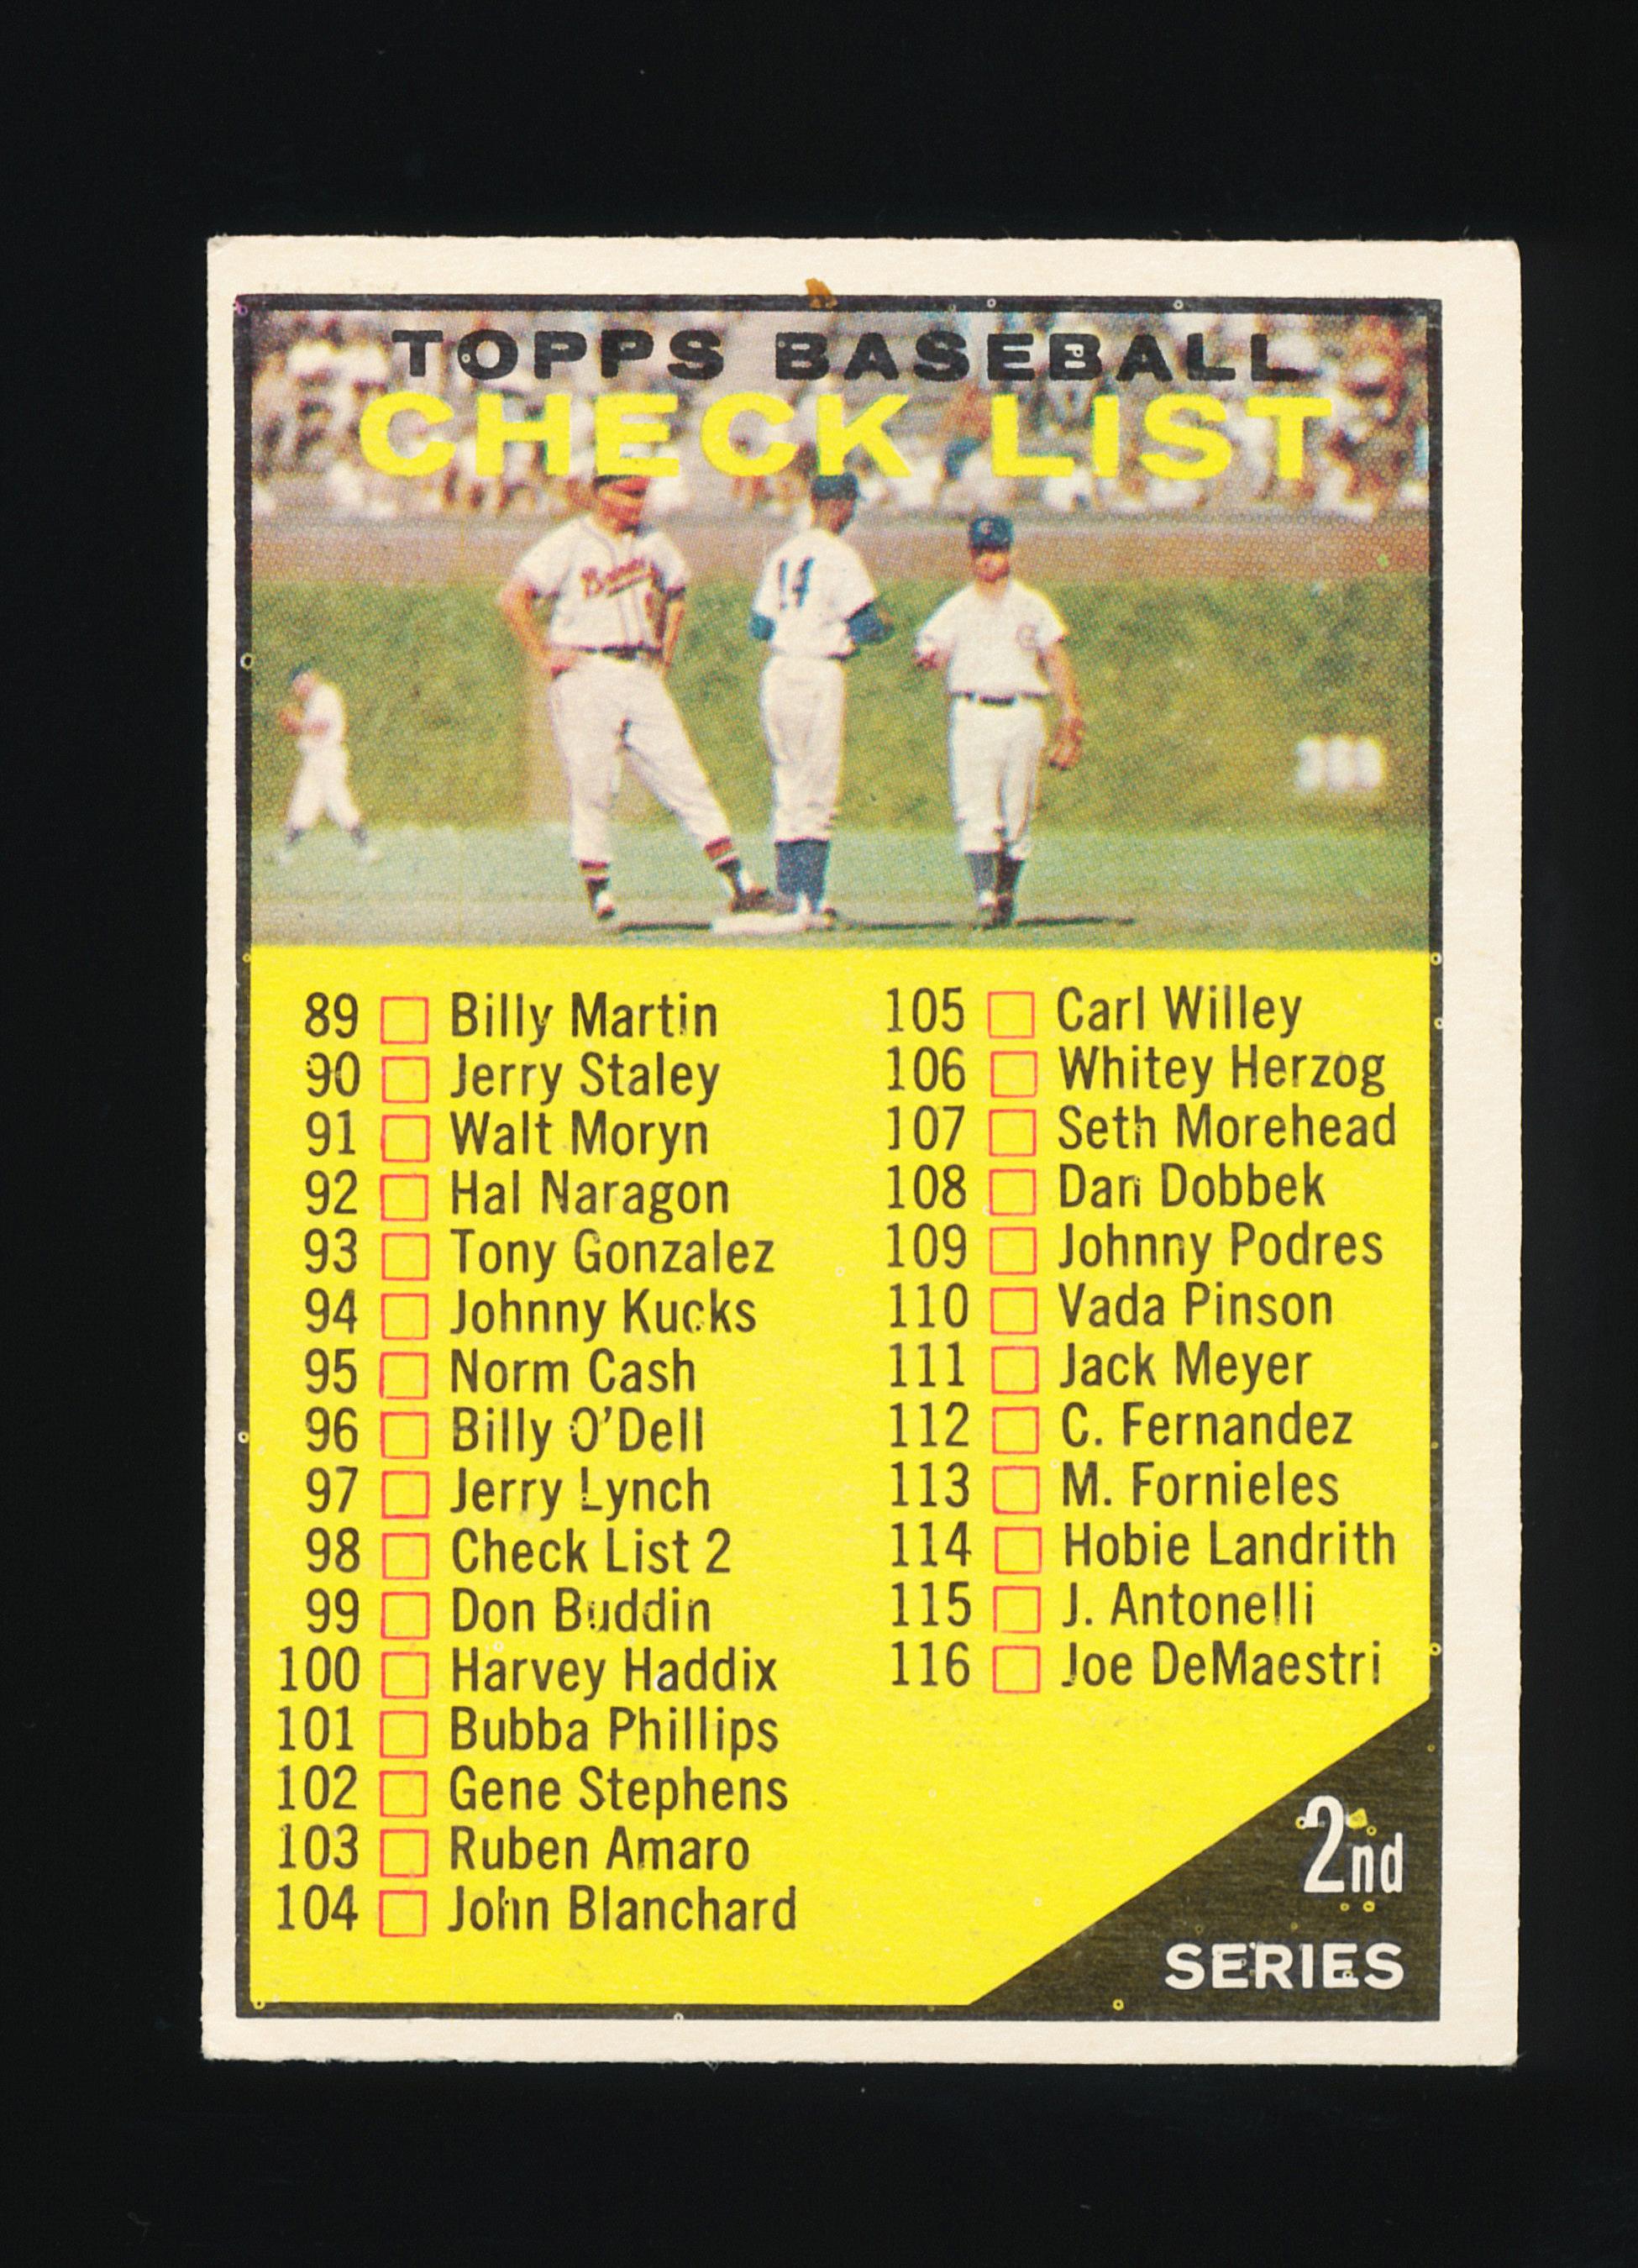 1961 Topps Baseball Card #98 2nd Series Checklist. Unchecked Condition